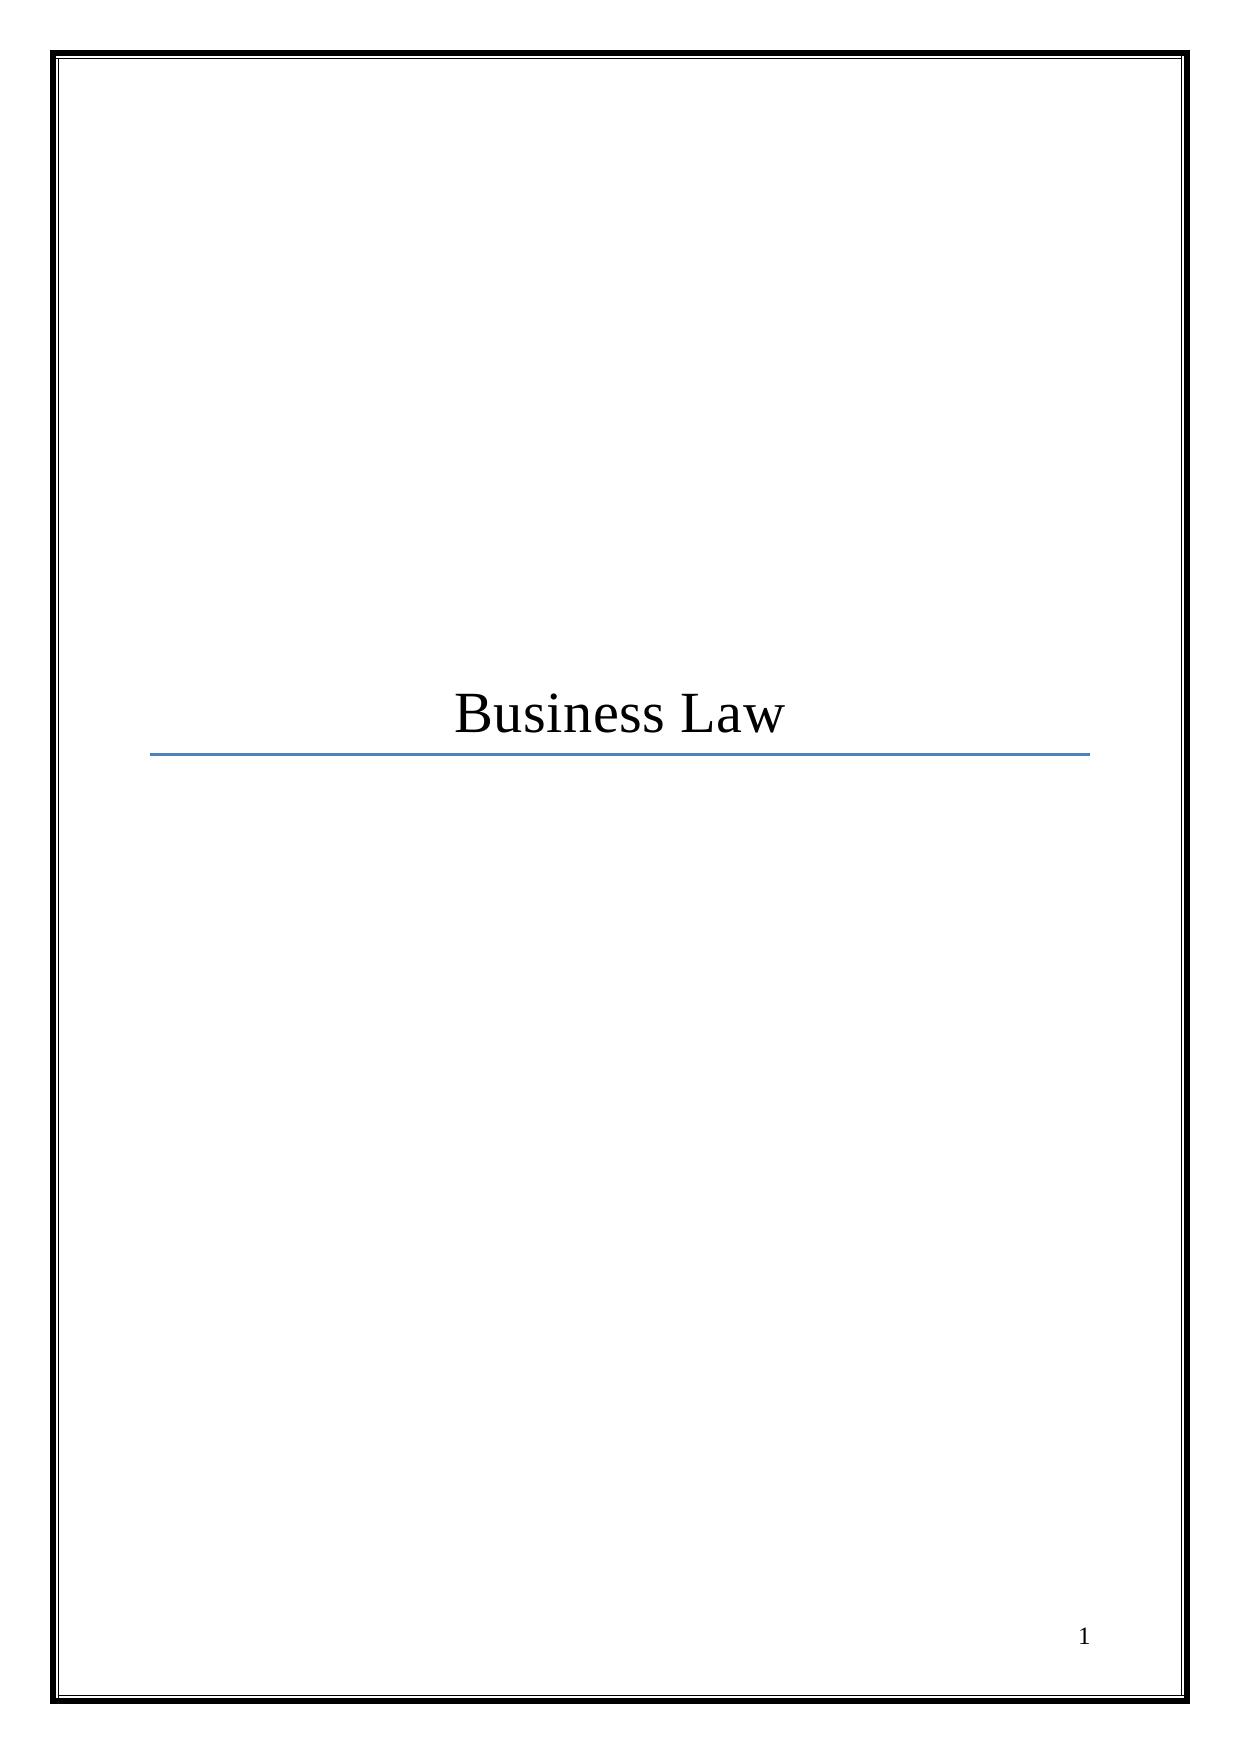 Business Law Analysis and Legal Solutions_1